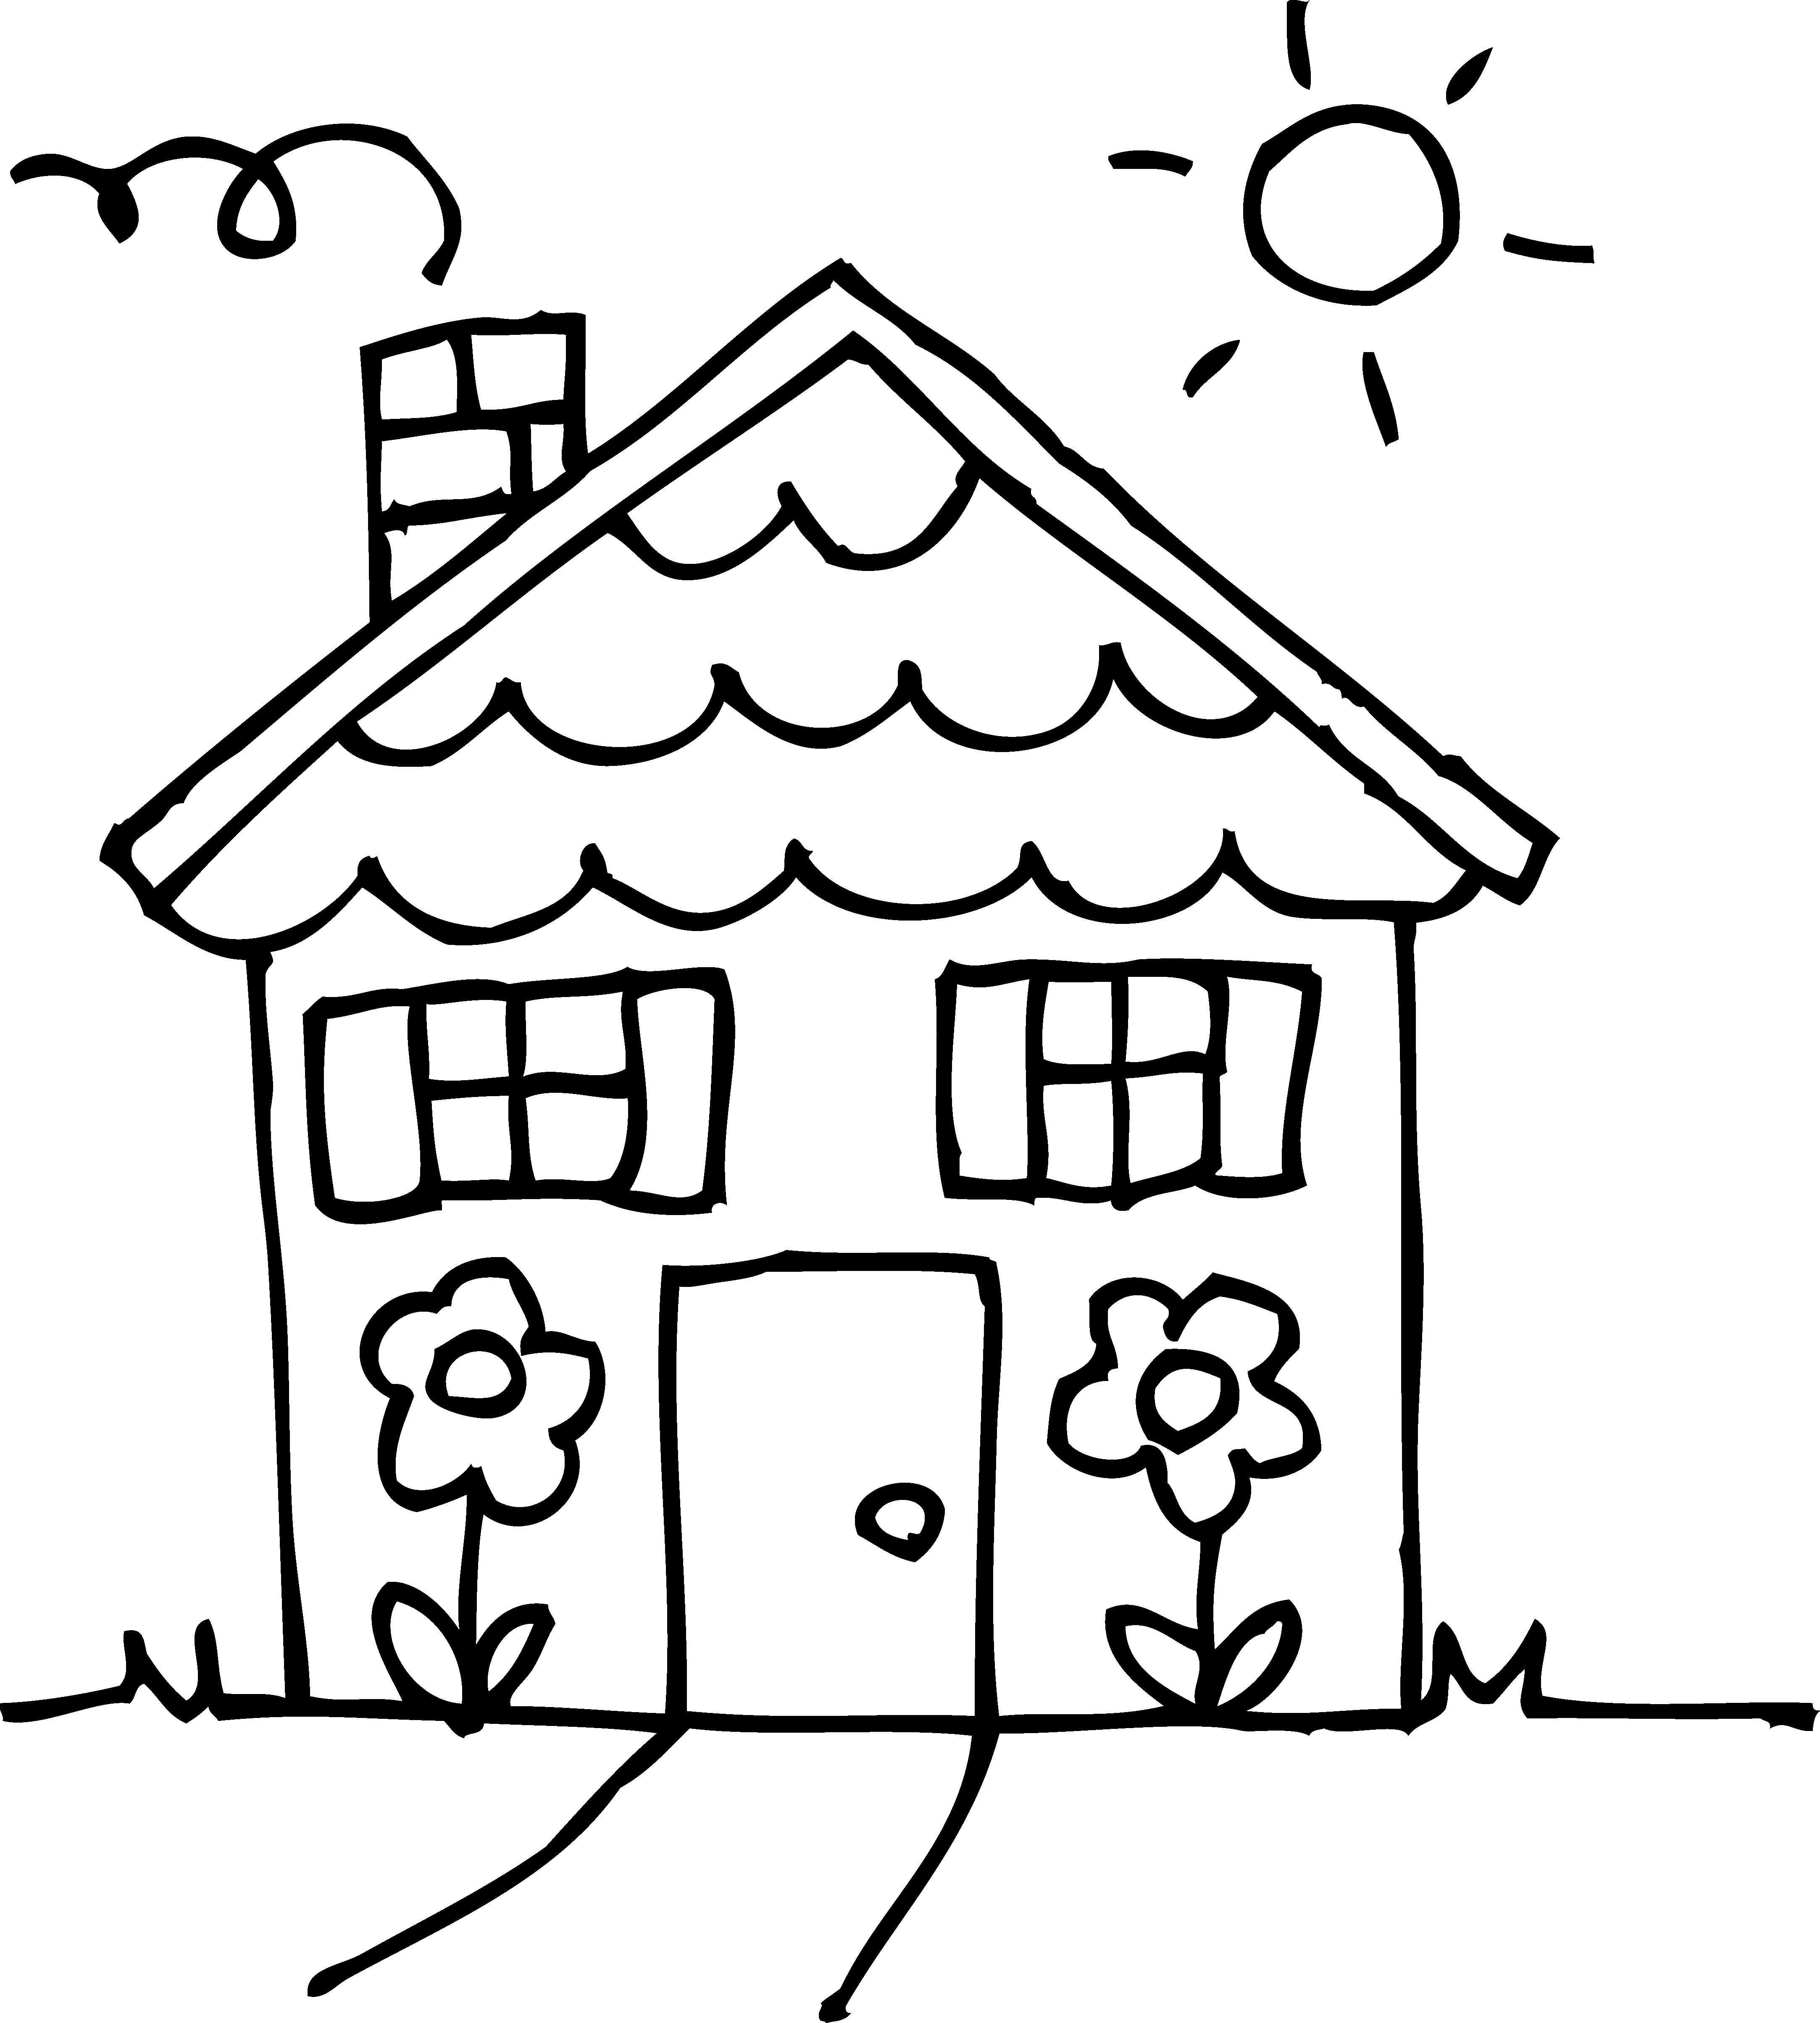 Simple home clipart black and white 